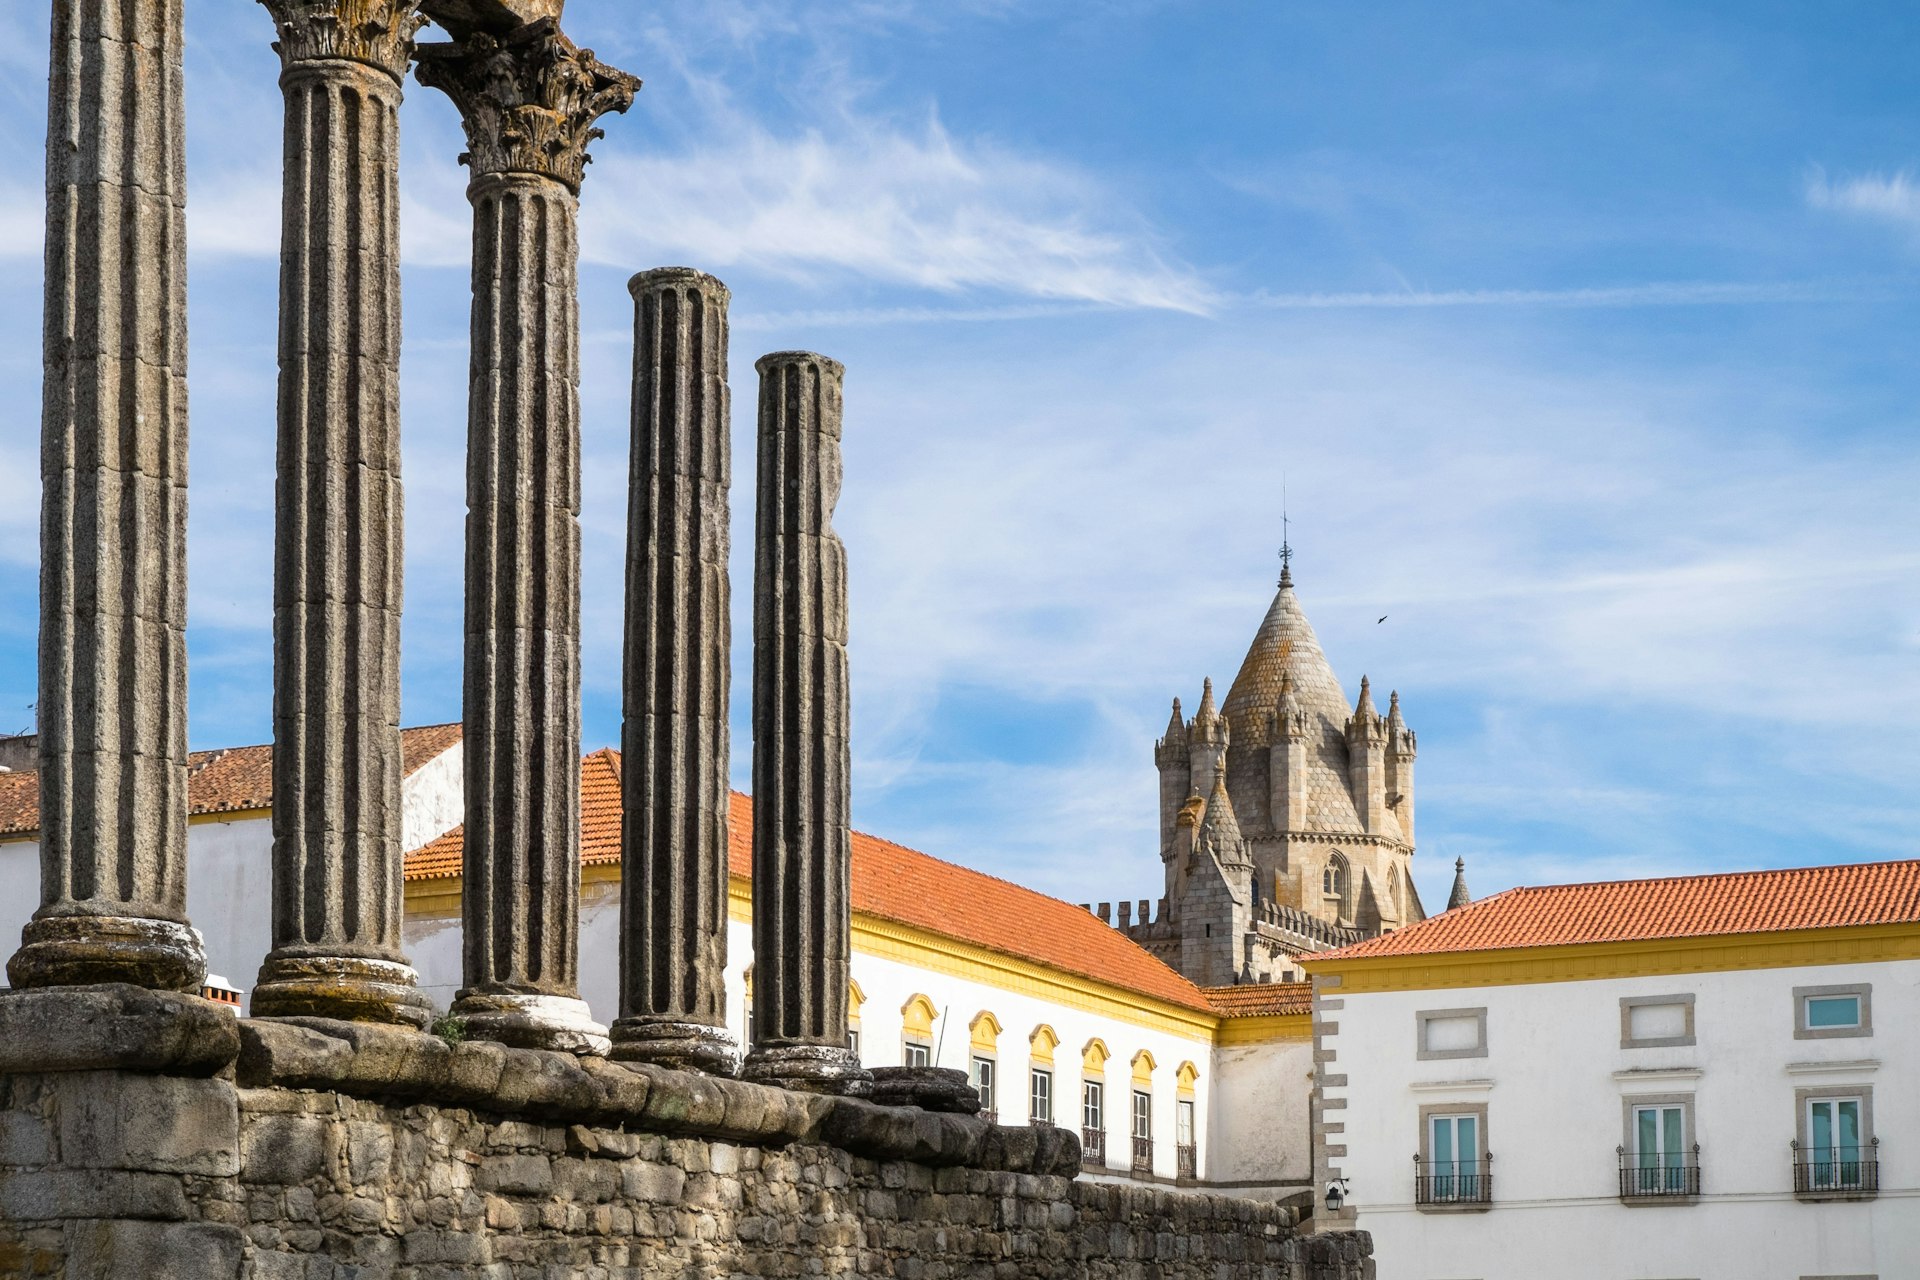 Ancient Roman ruins in the town of Evora in Portugal